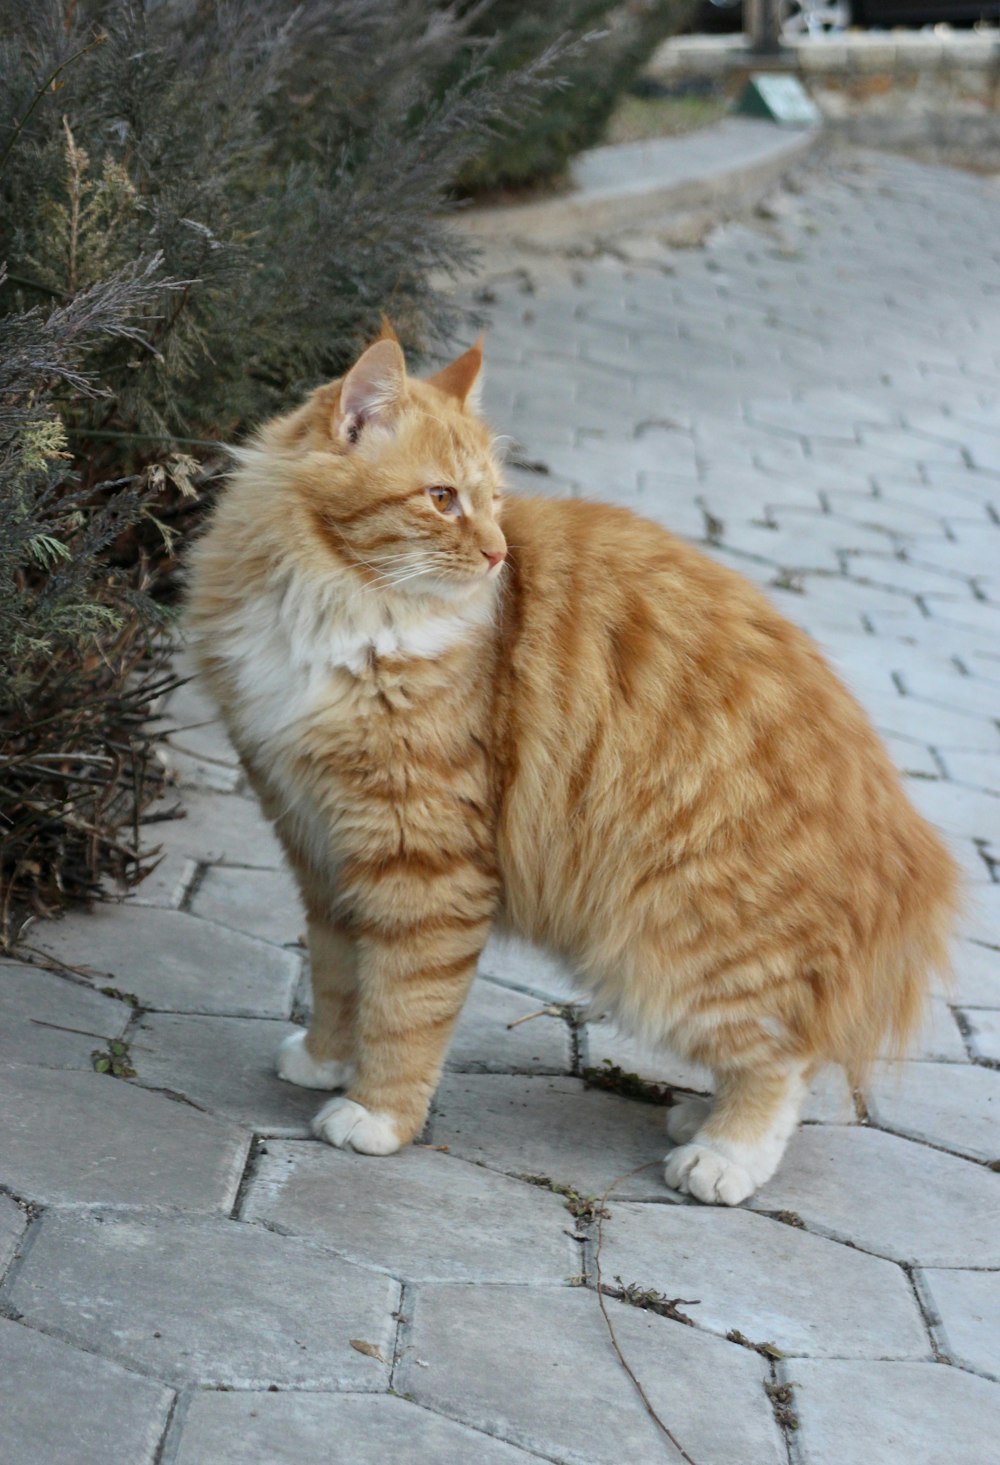 an orange and white cat standing on a brick walkway